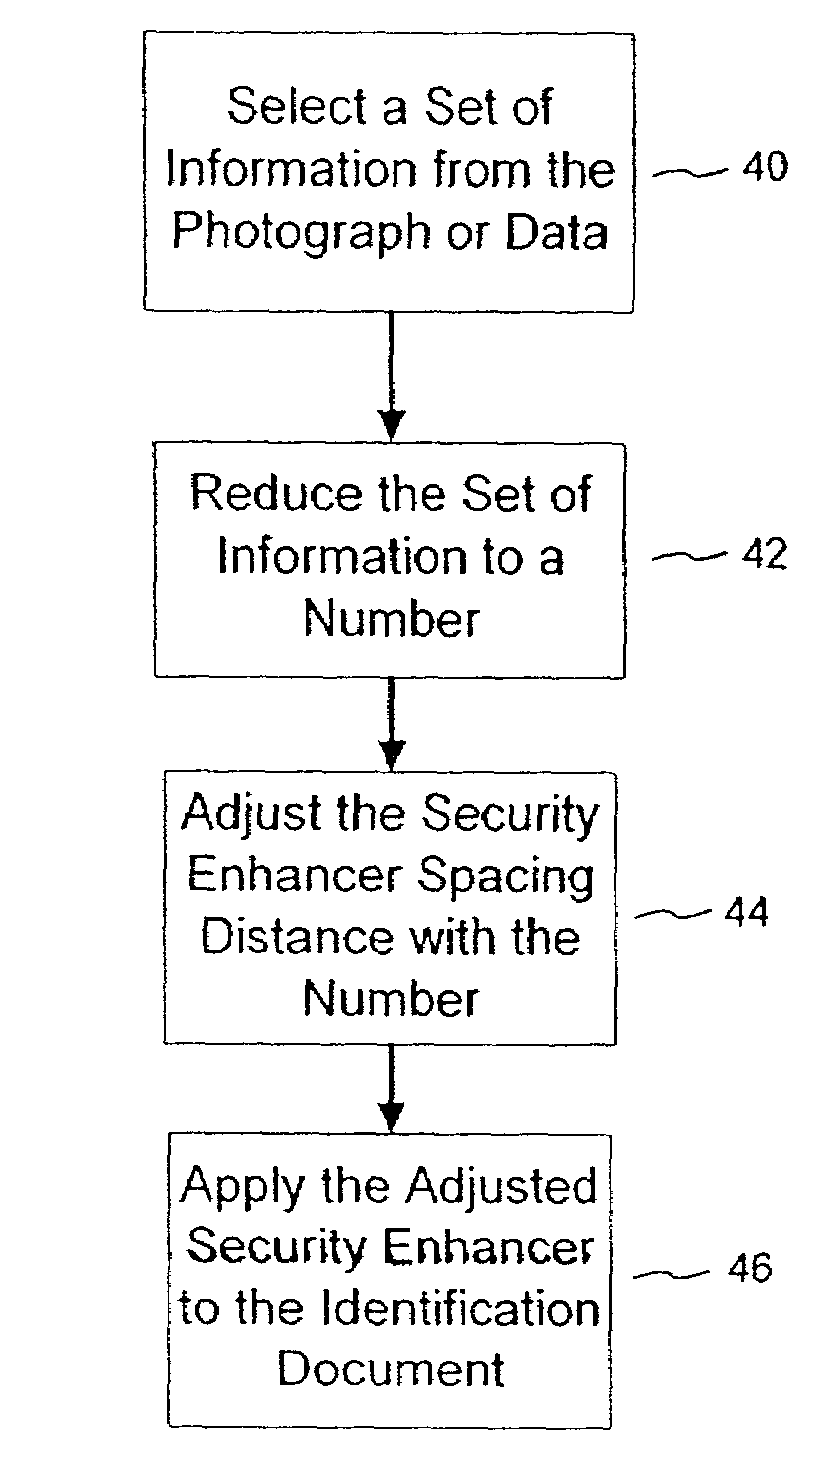 Tamper-resistant authentication techniques for identification documents